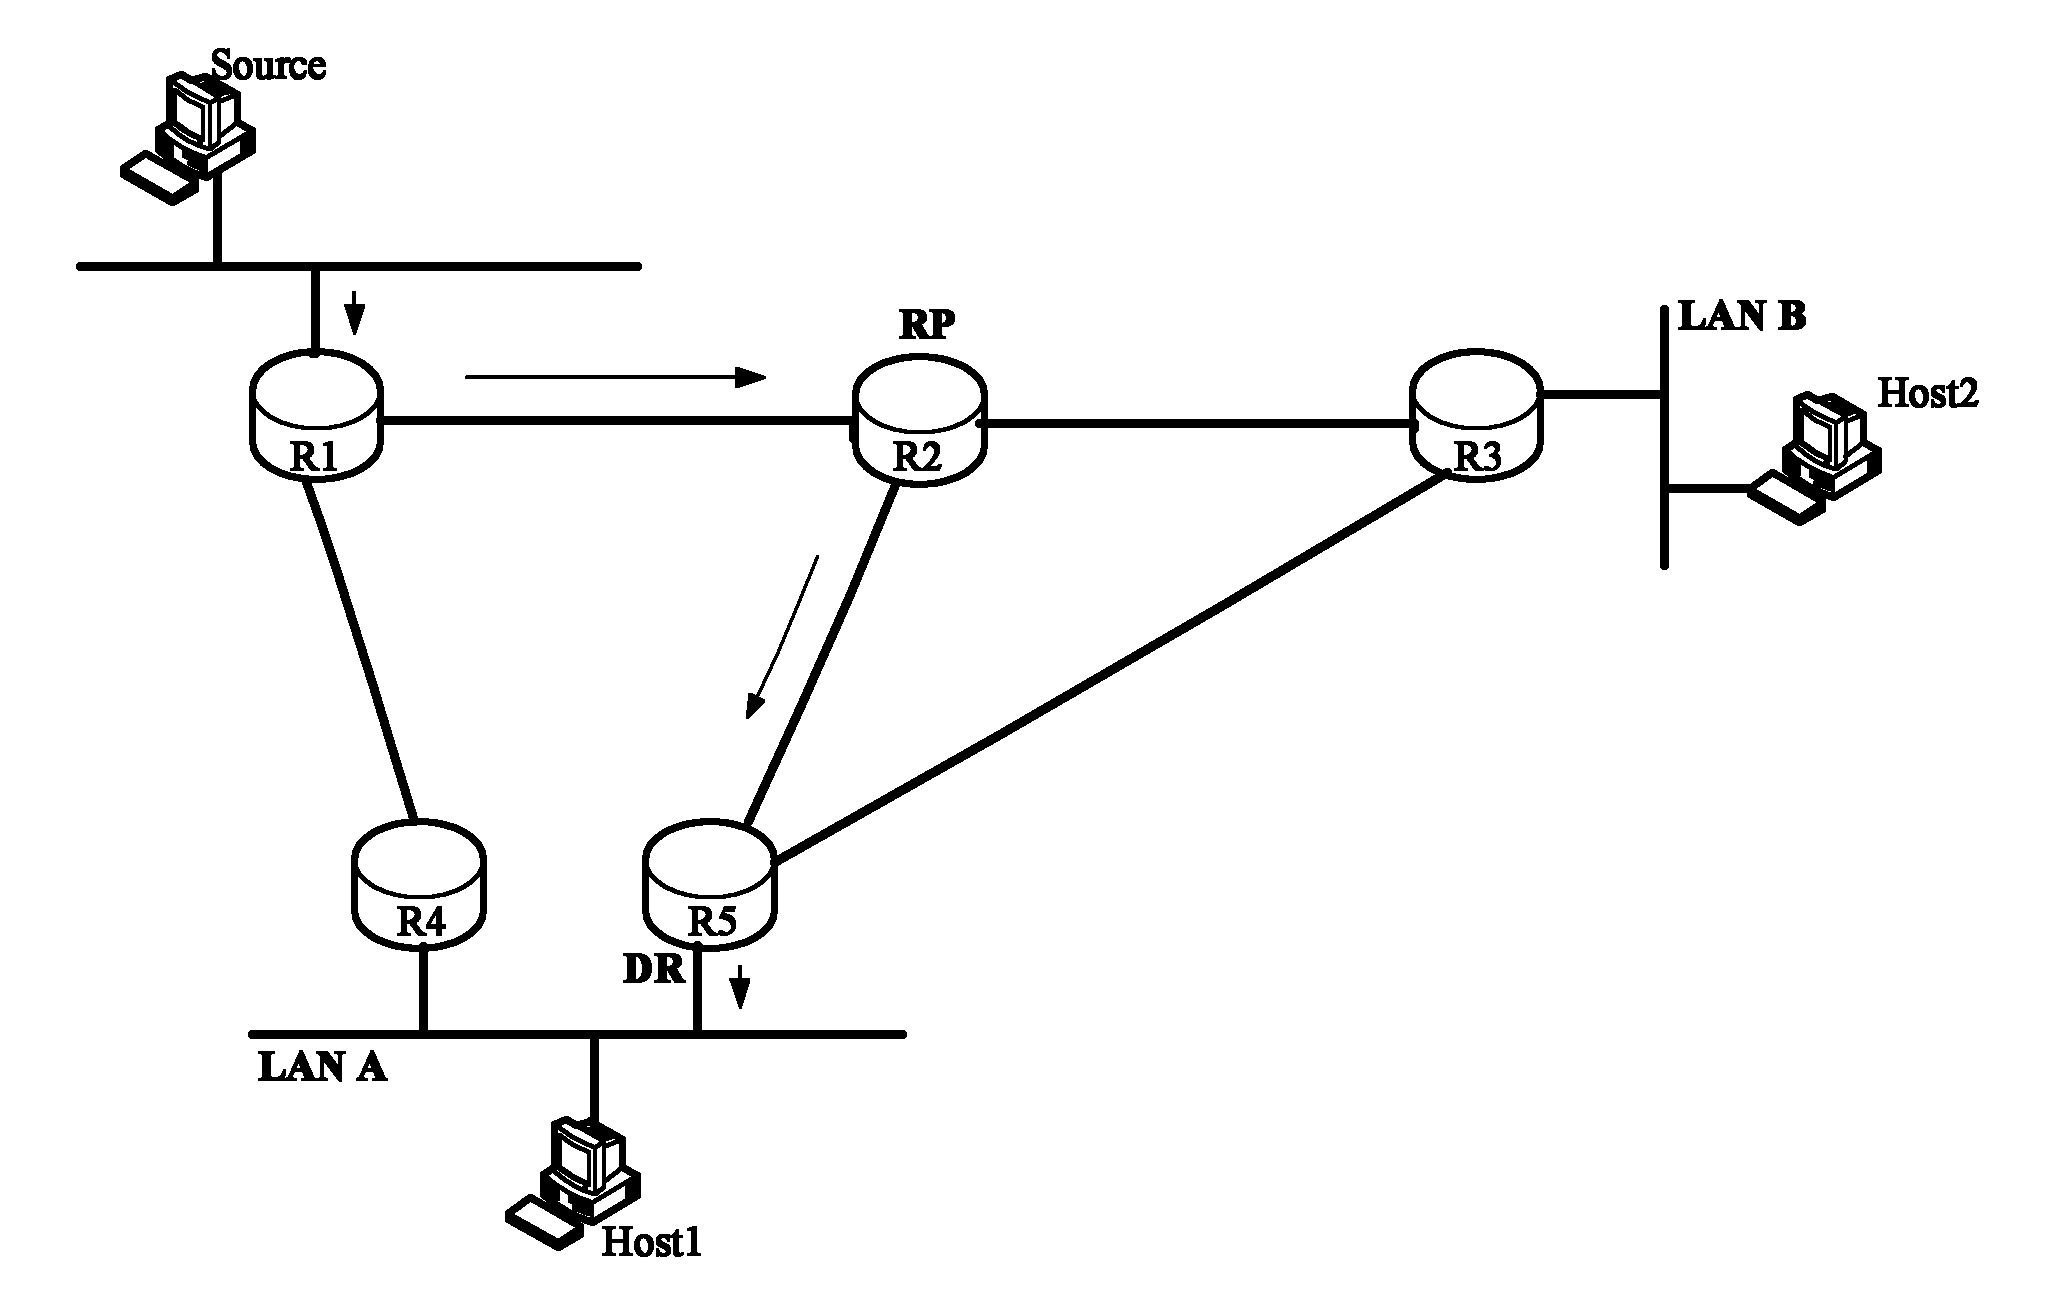 Multicast flow forwarding method and multicast router in local area network